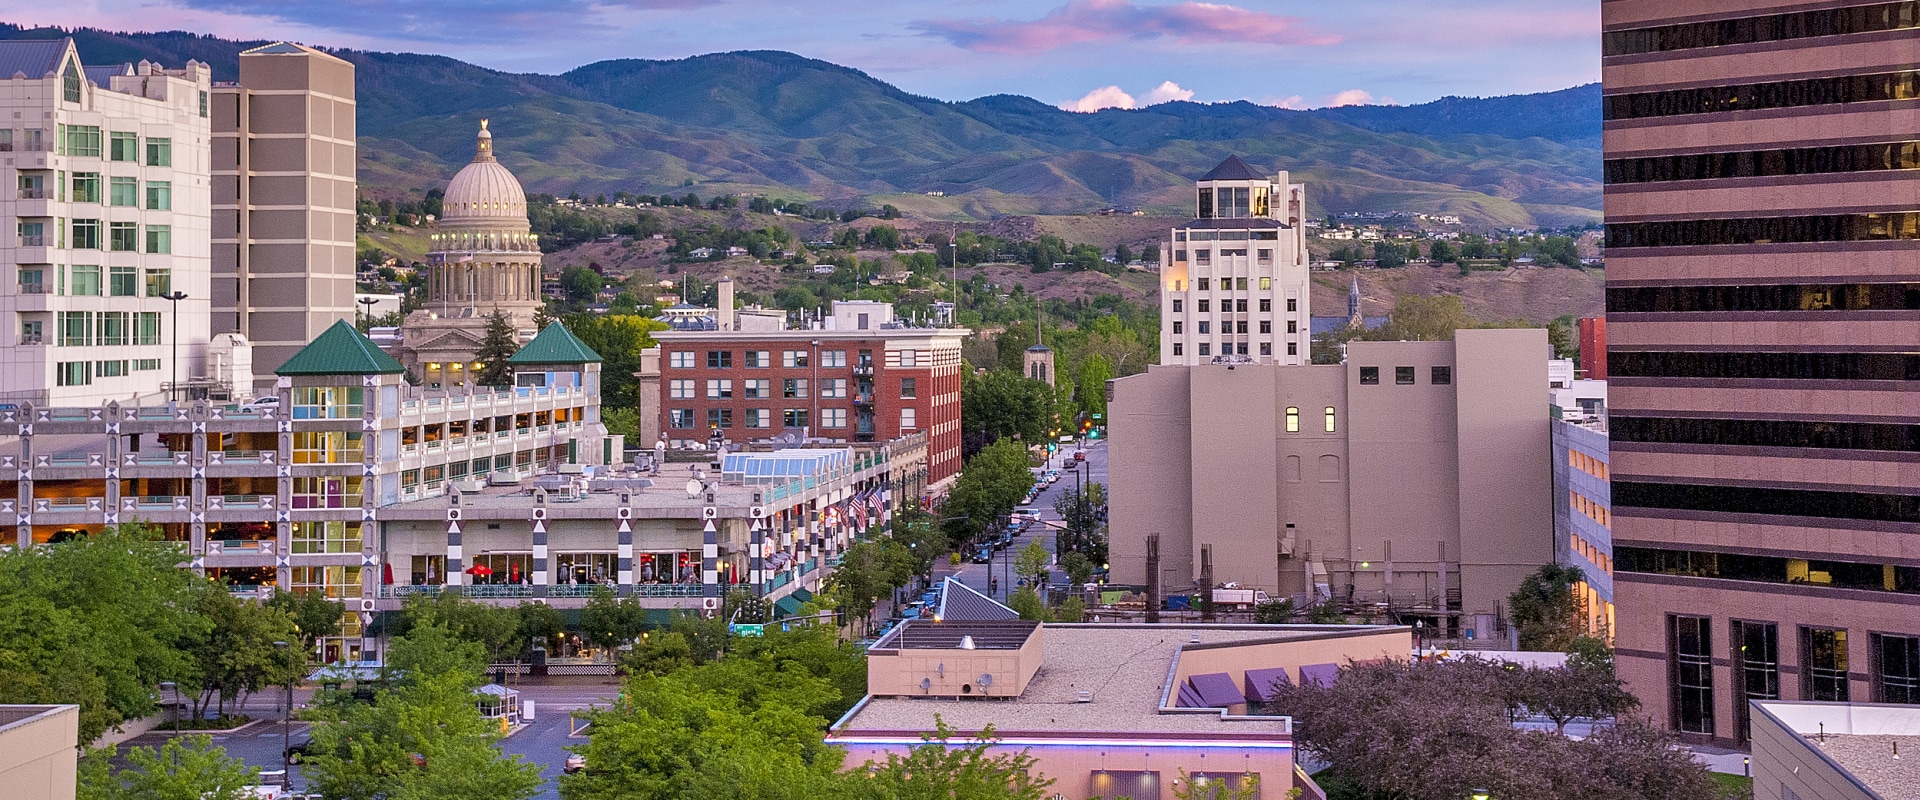 Is boise idaho expensive to live?